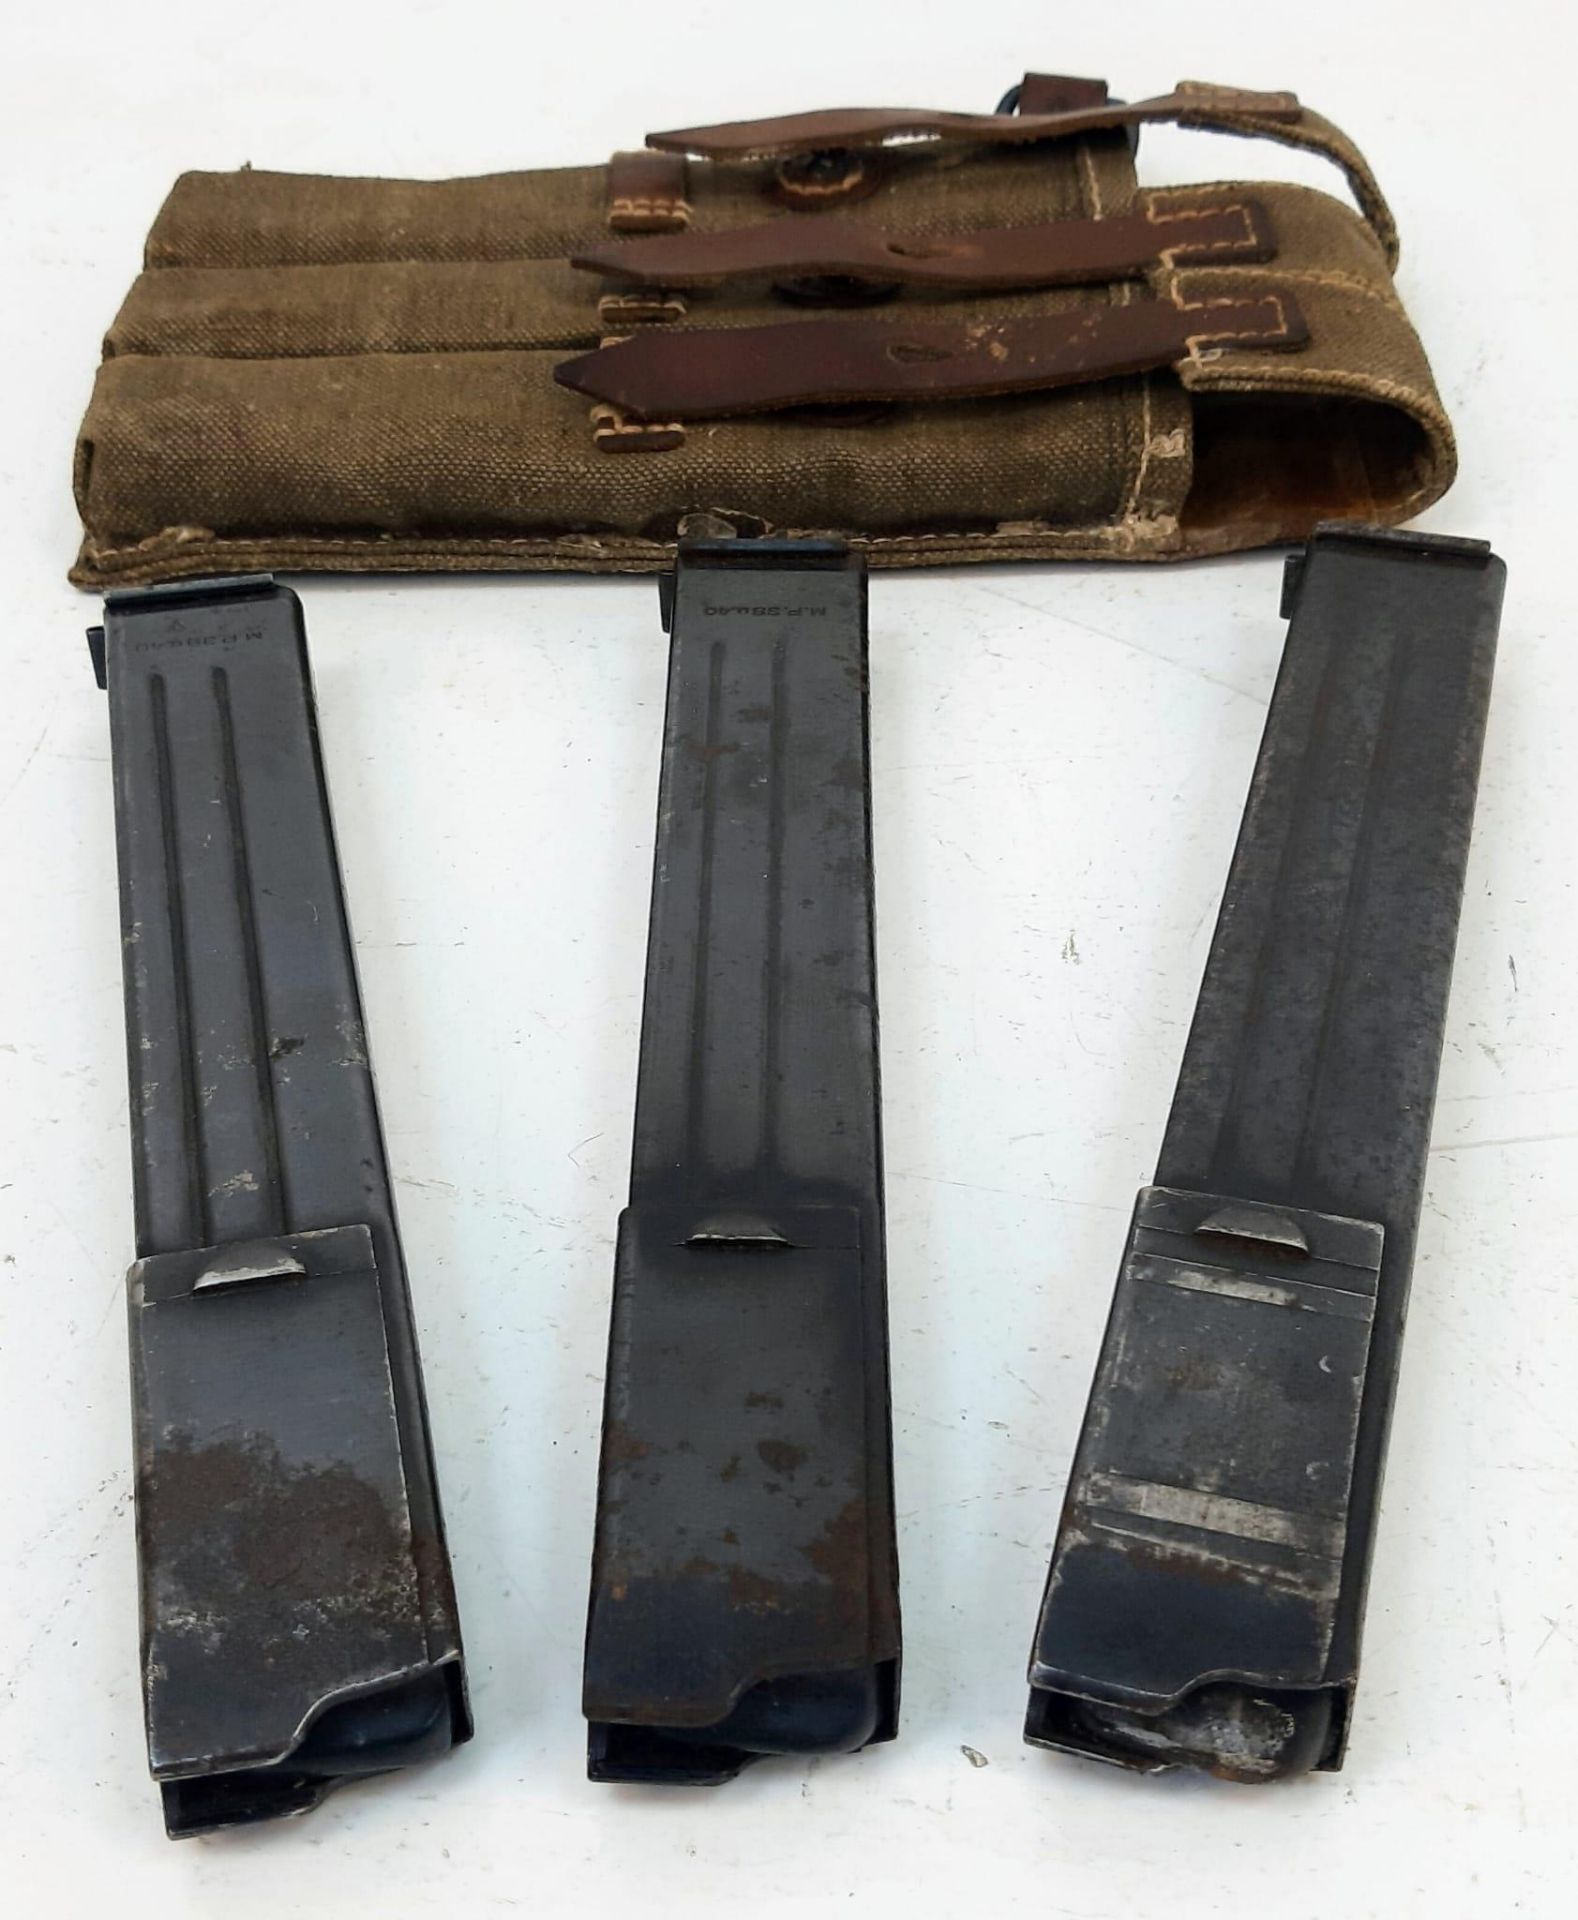 WW2 German MP38 – MP40 Ammo Pouch with 3 MP40 Magazines Dated 1941. Nice Markings. 100% Original. - Image 2 of 4